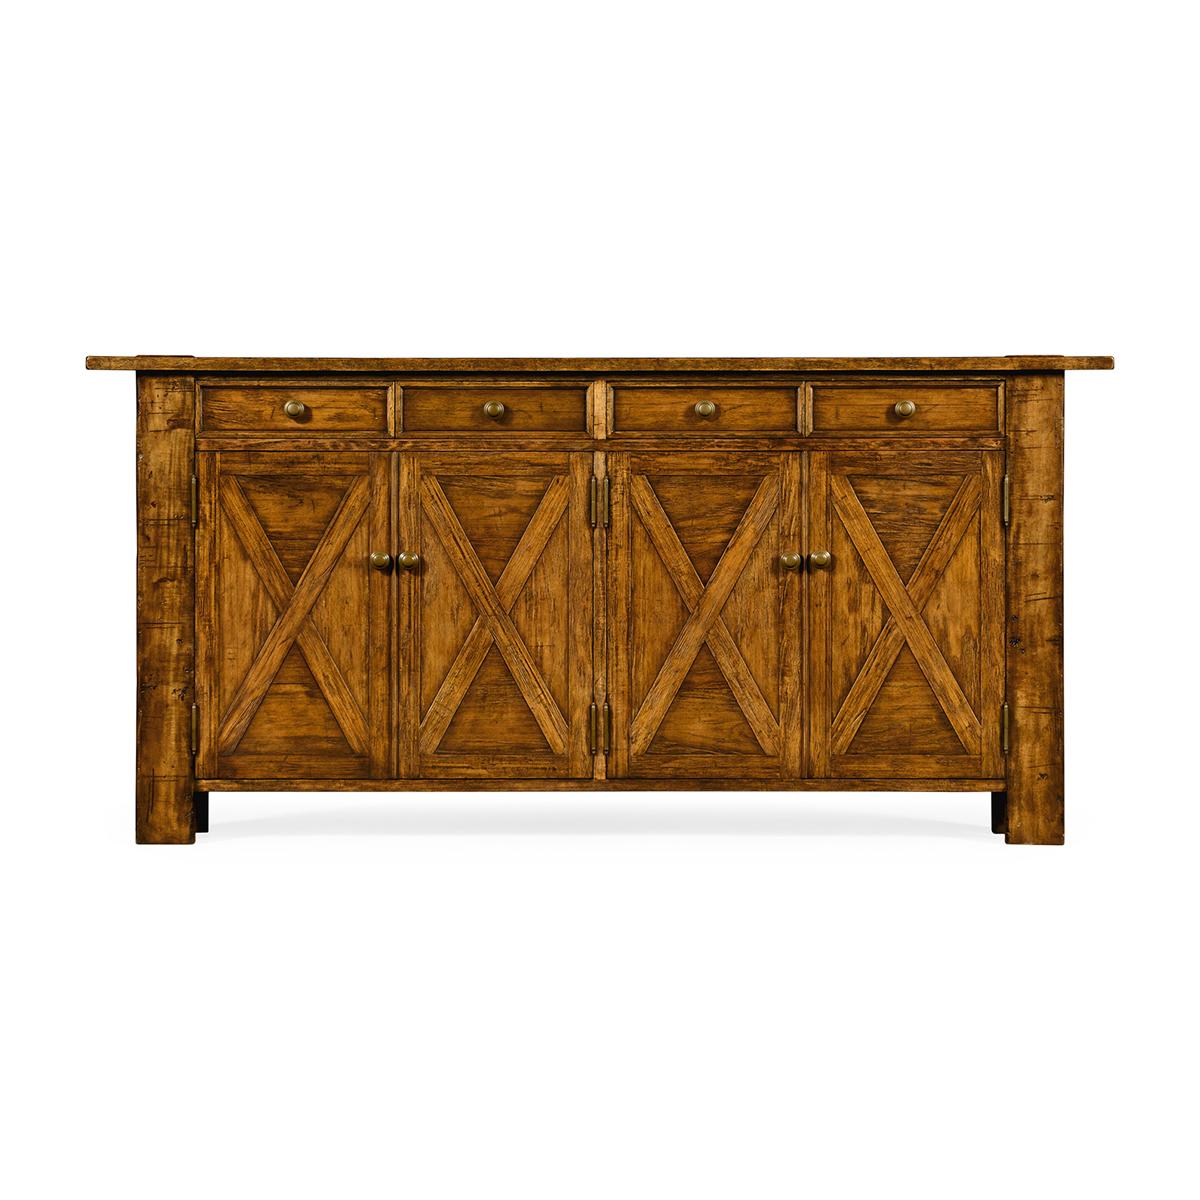 Narrow Country credenza with a rustic finish in a walnut stain, with paneled details showing exposed saw marks with four doors, shelves within, and four drawers. 

Dimensions: 84